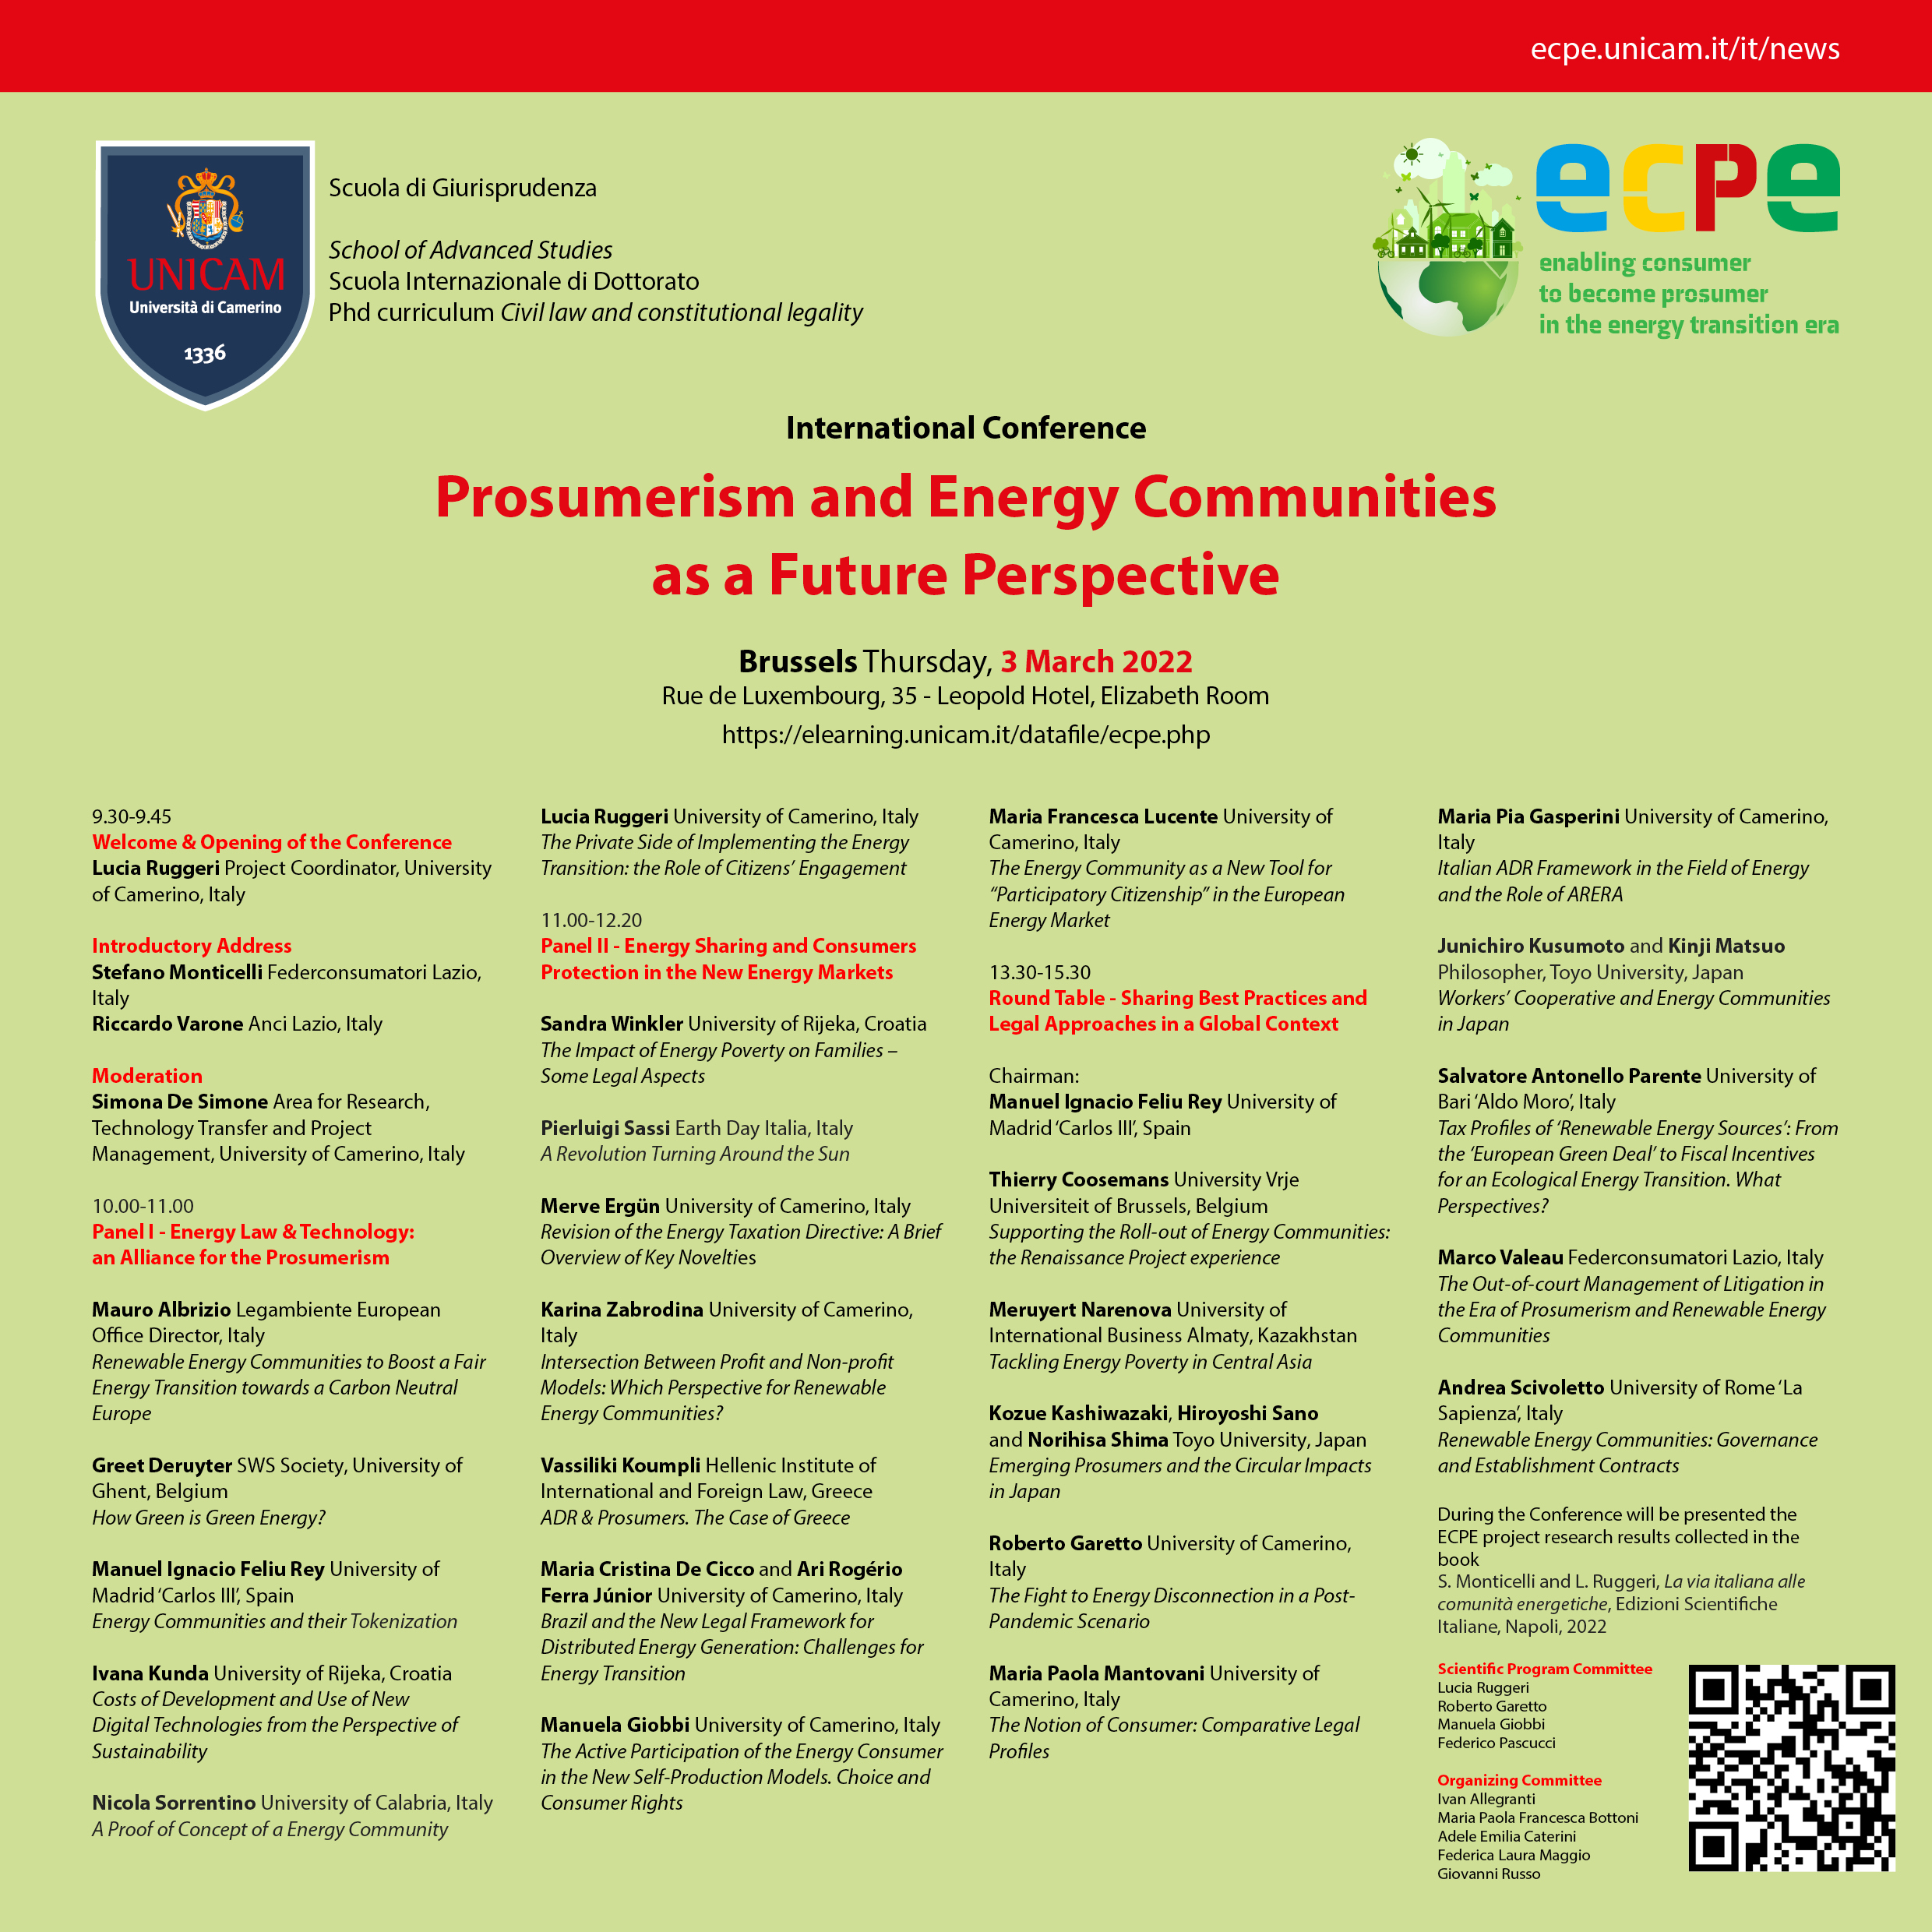 Prosumerism and Energy Communities as a Future Perspective